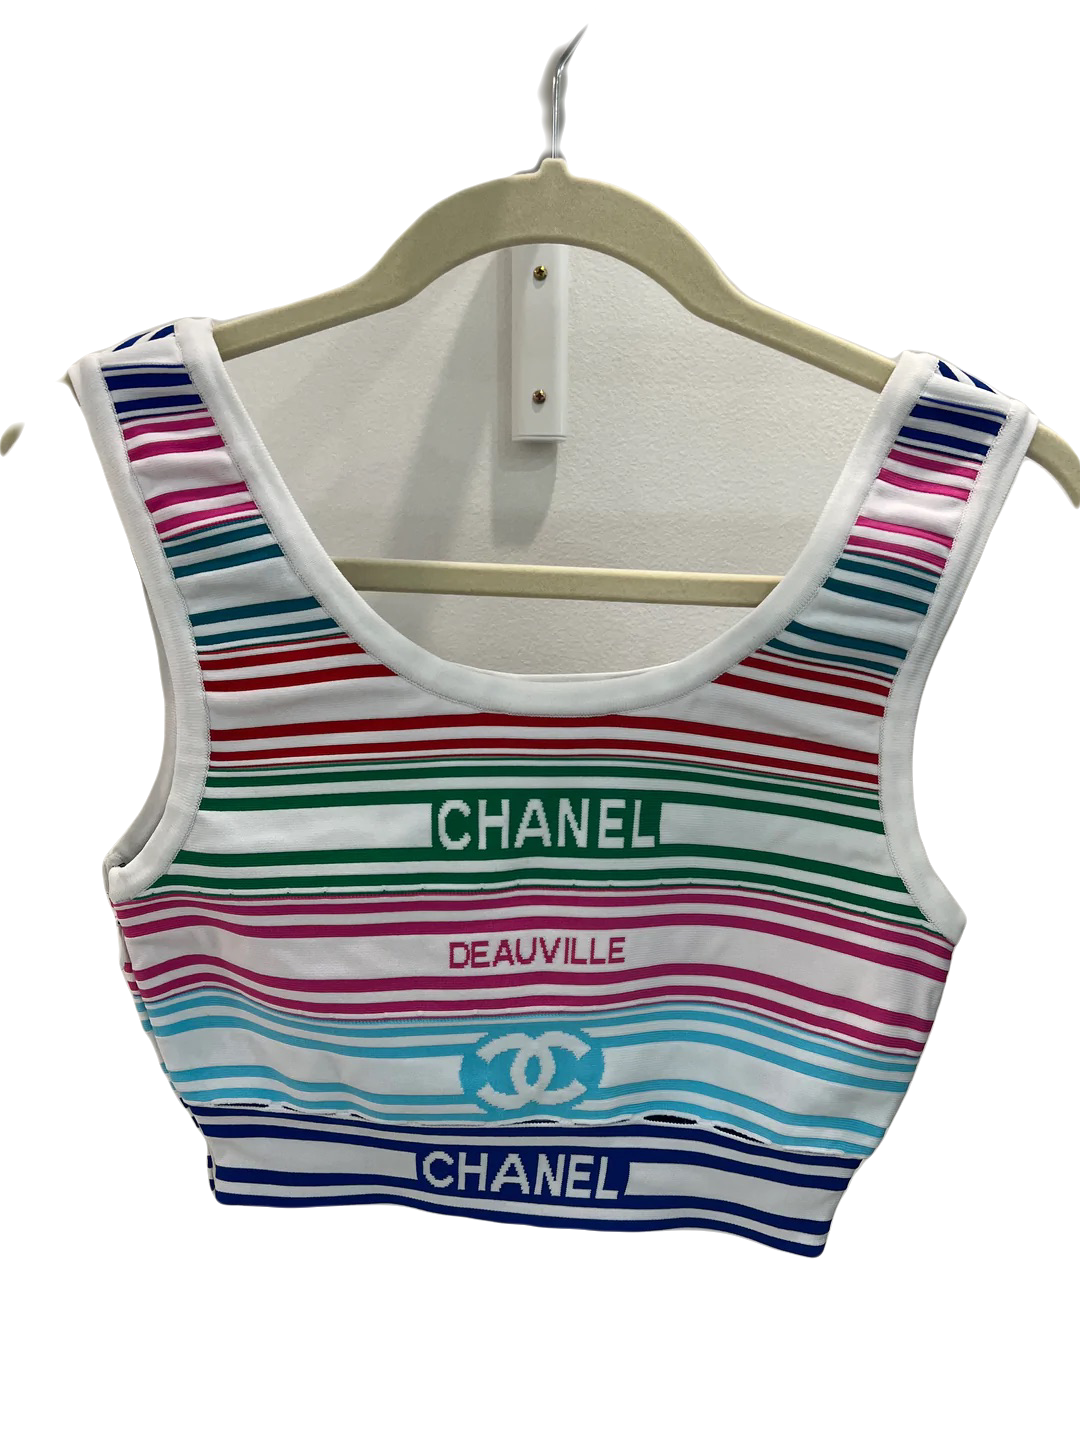 Chanel Crop Top - Size 34 - SOLD